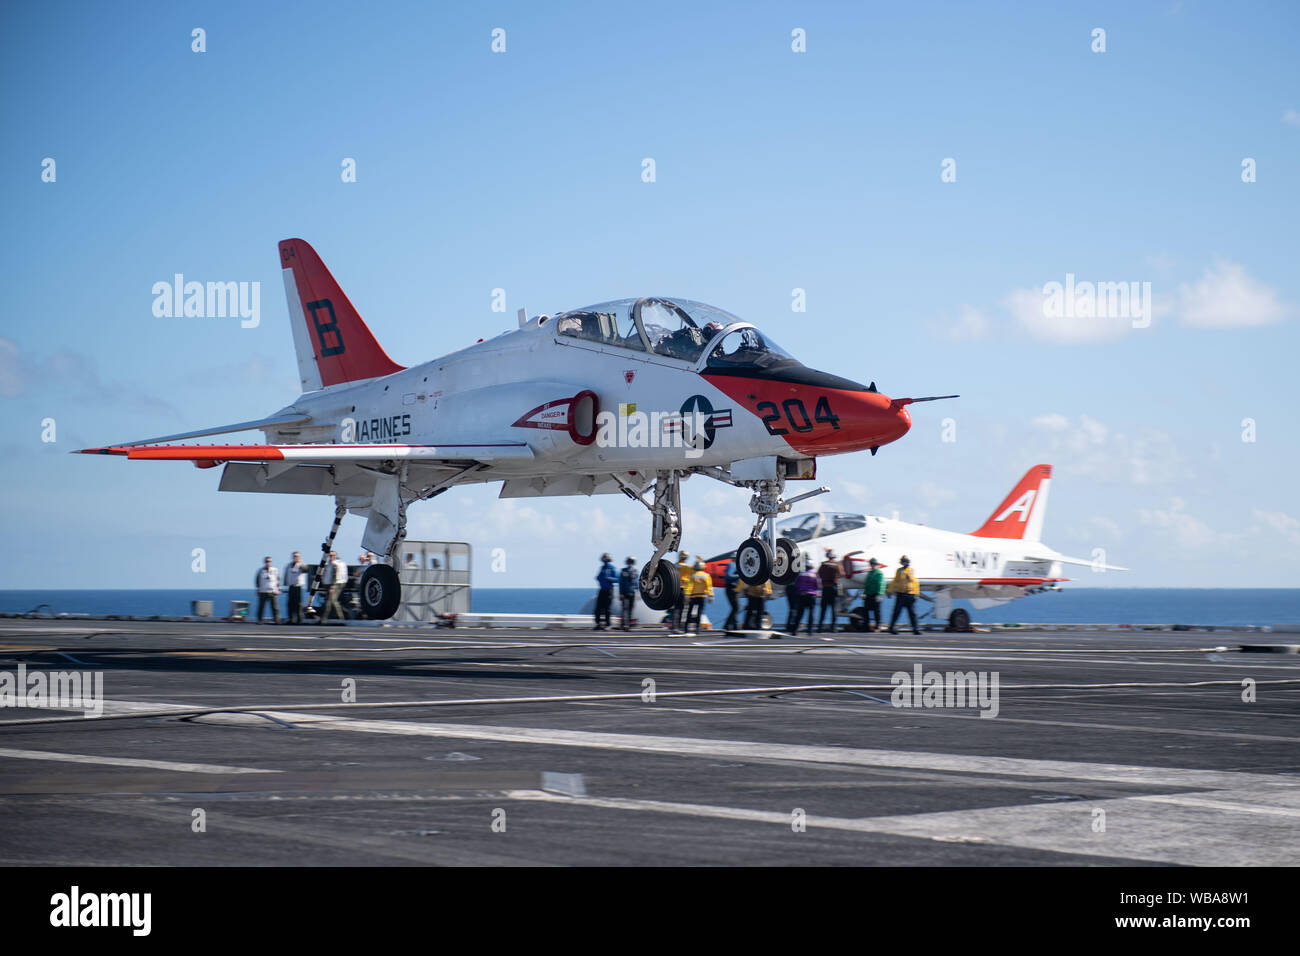 A T-45C Goshawk training aircraft, assigned to Training Air Wing (TW) 2, prepares to land on the flight deck of the aircraft carrier USS John C. Stennis (CVN 74) in the Atlantic Ocean, Aug. 23, 2019. The John C. Stennis is underway conducting carrier qualifications in support of Chief of Naval Air Training Command. (U.S. Navy photo by Mass Communication Specialist 3rd Class Skyler Okerman) Stock Photo